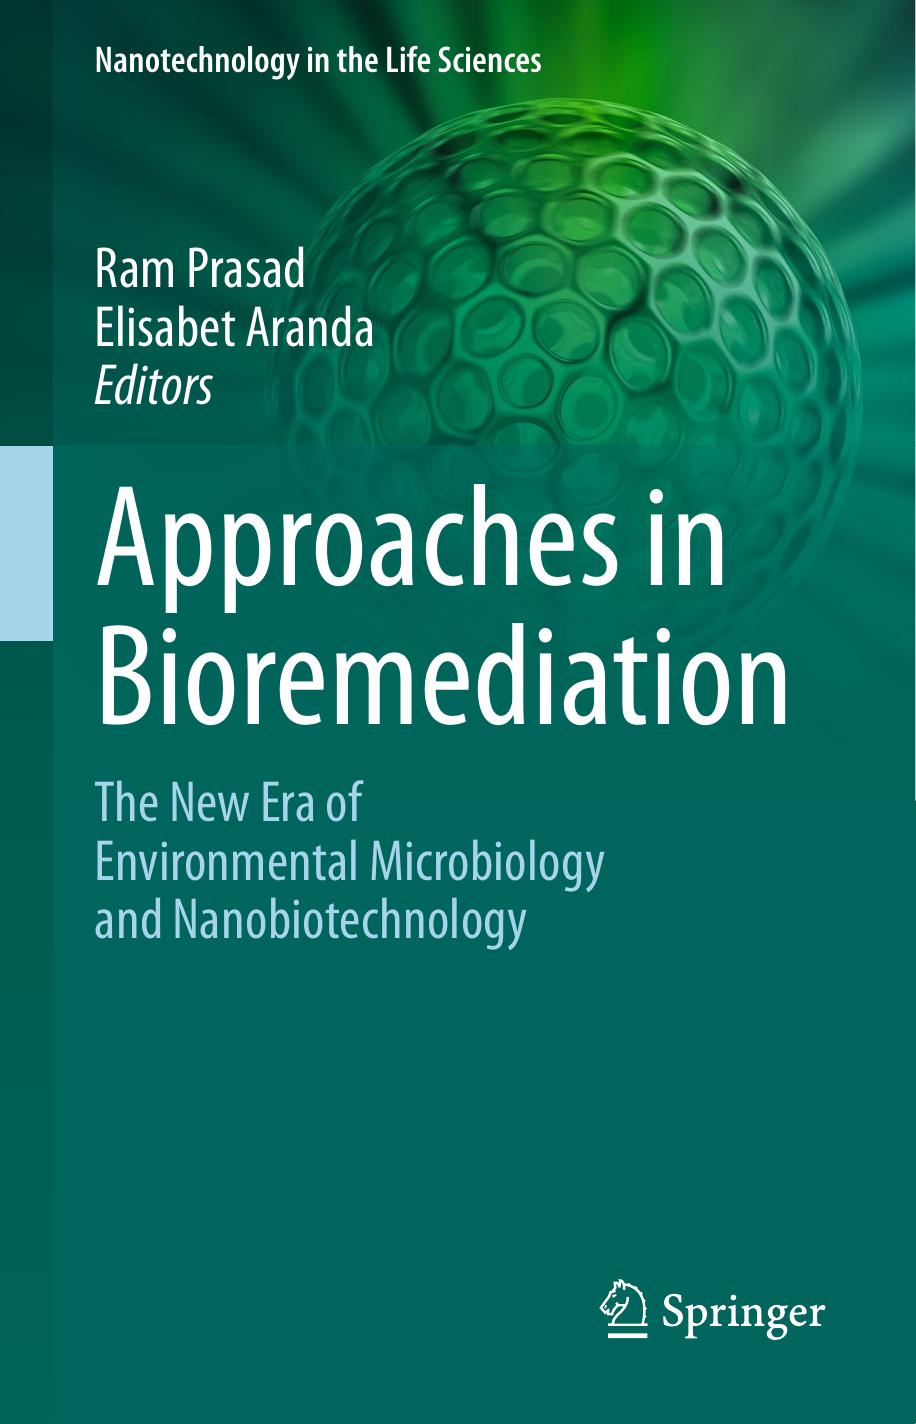 Approaches in Bioremediation  The New Era of Environmental Microbiology2018